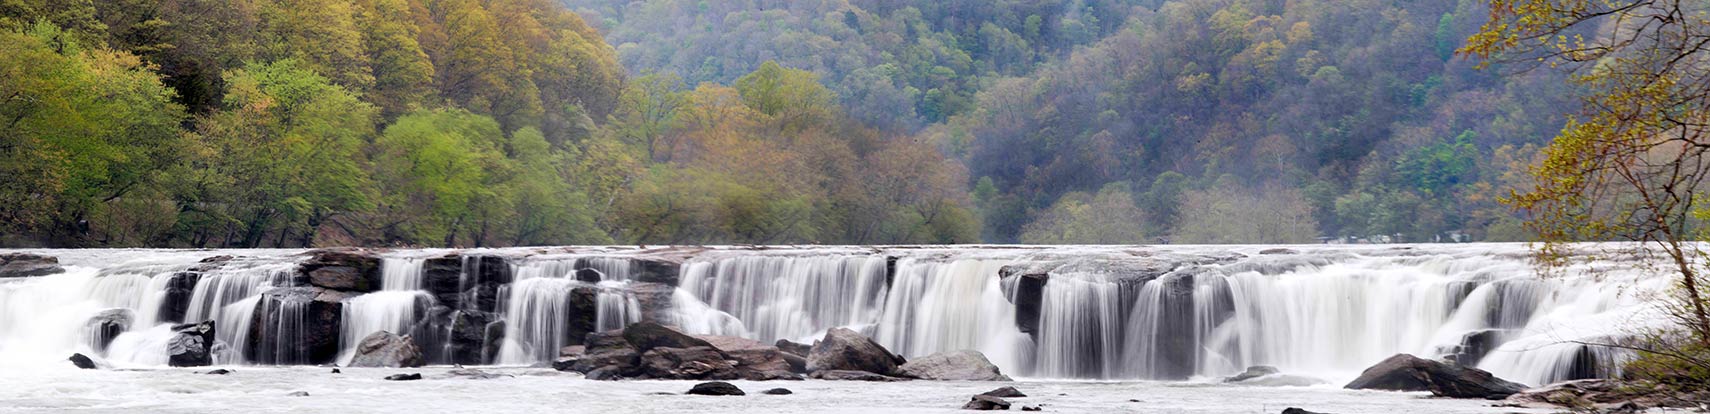 New River Sandstone Falls in Summers County, West Virginia